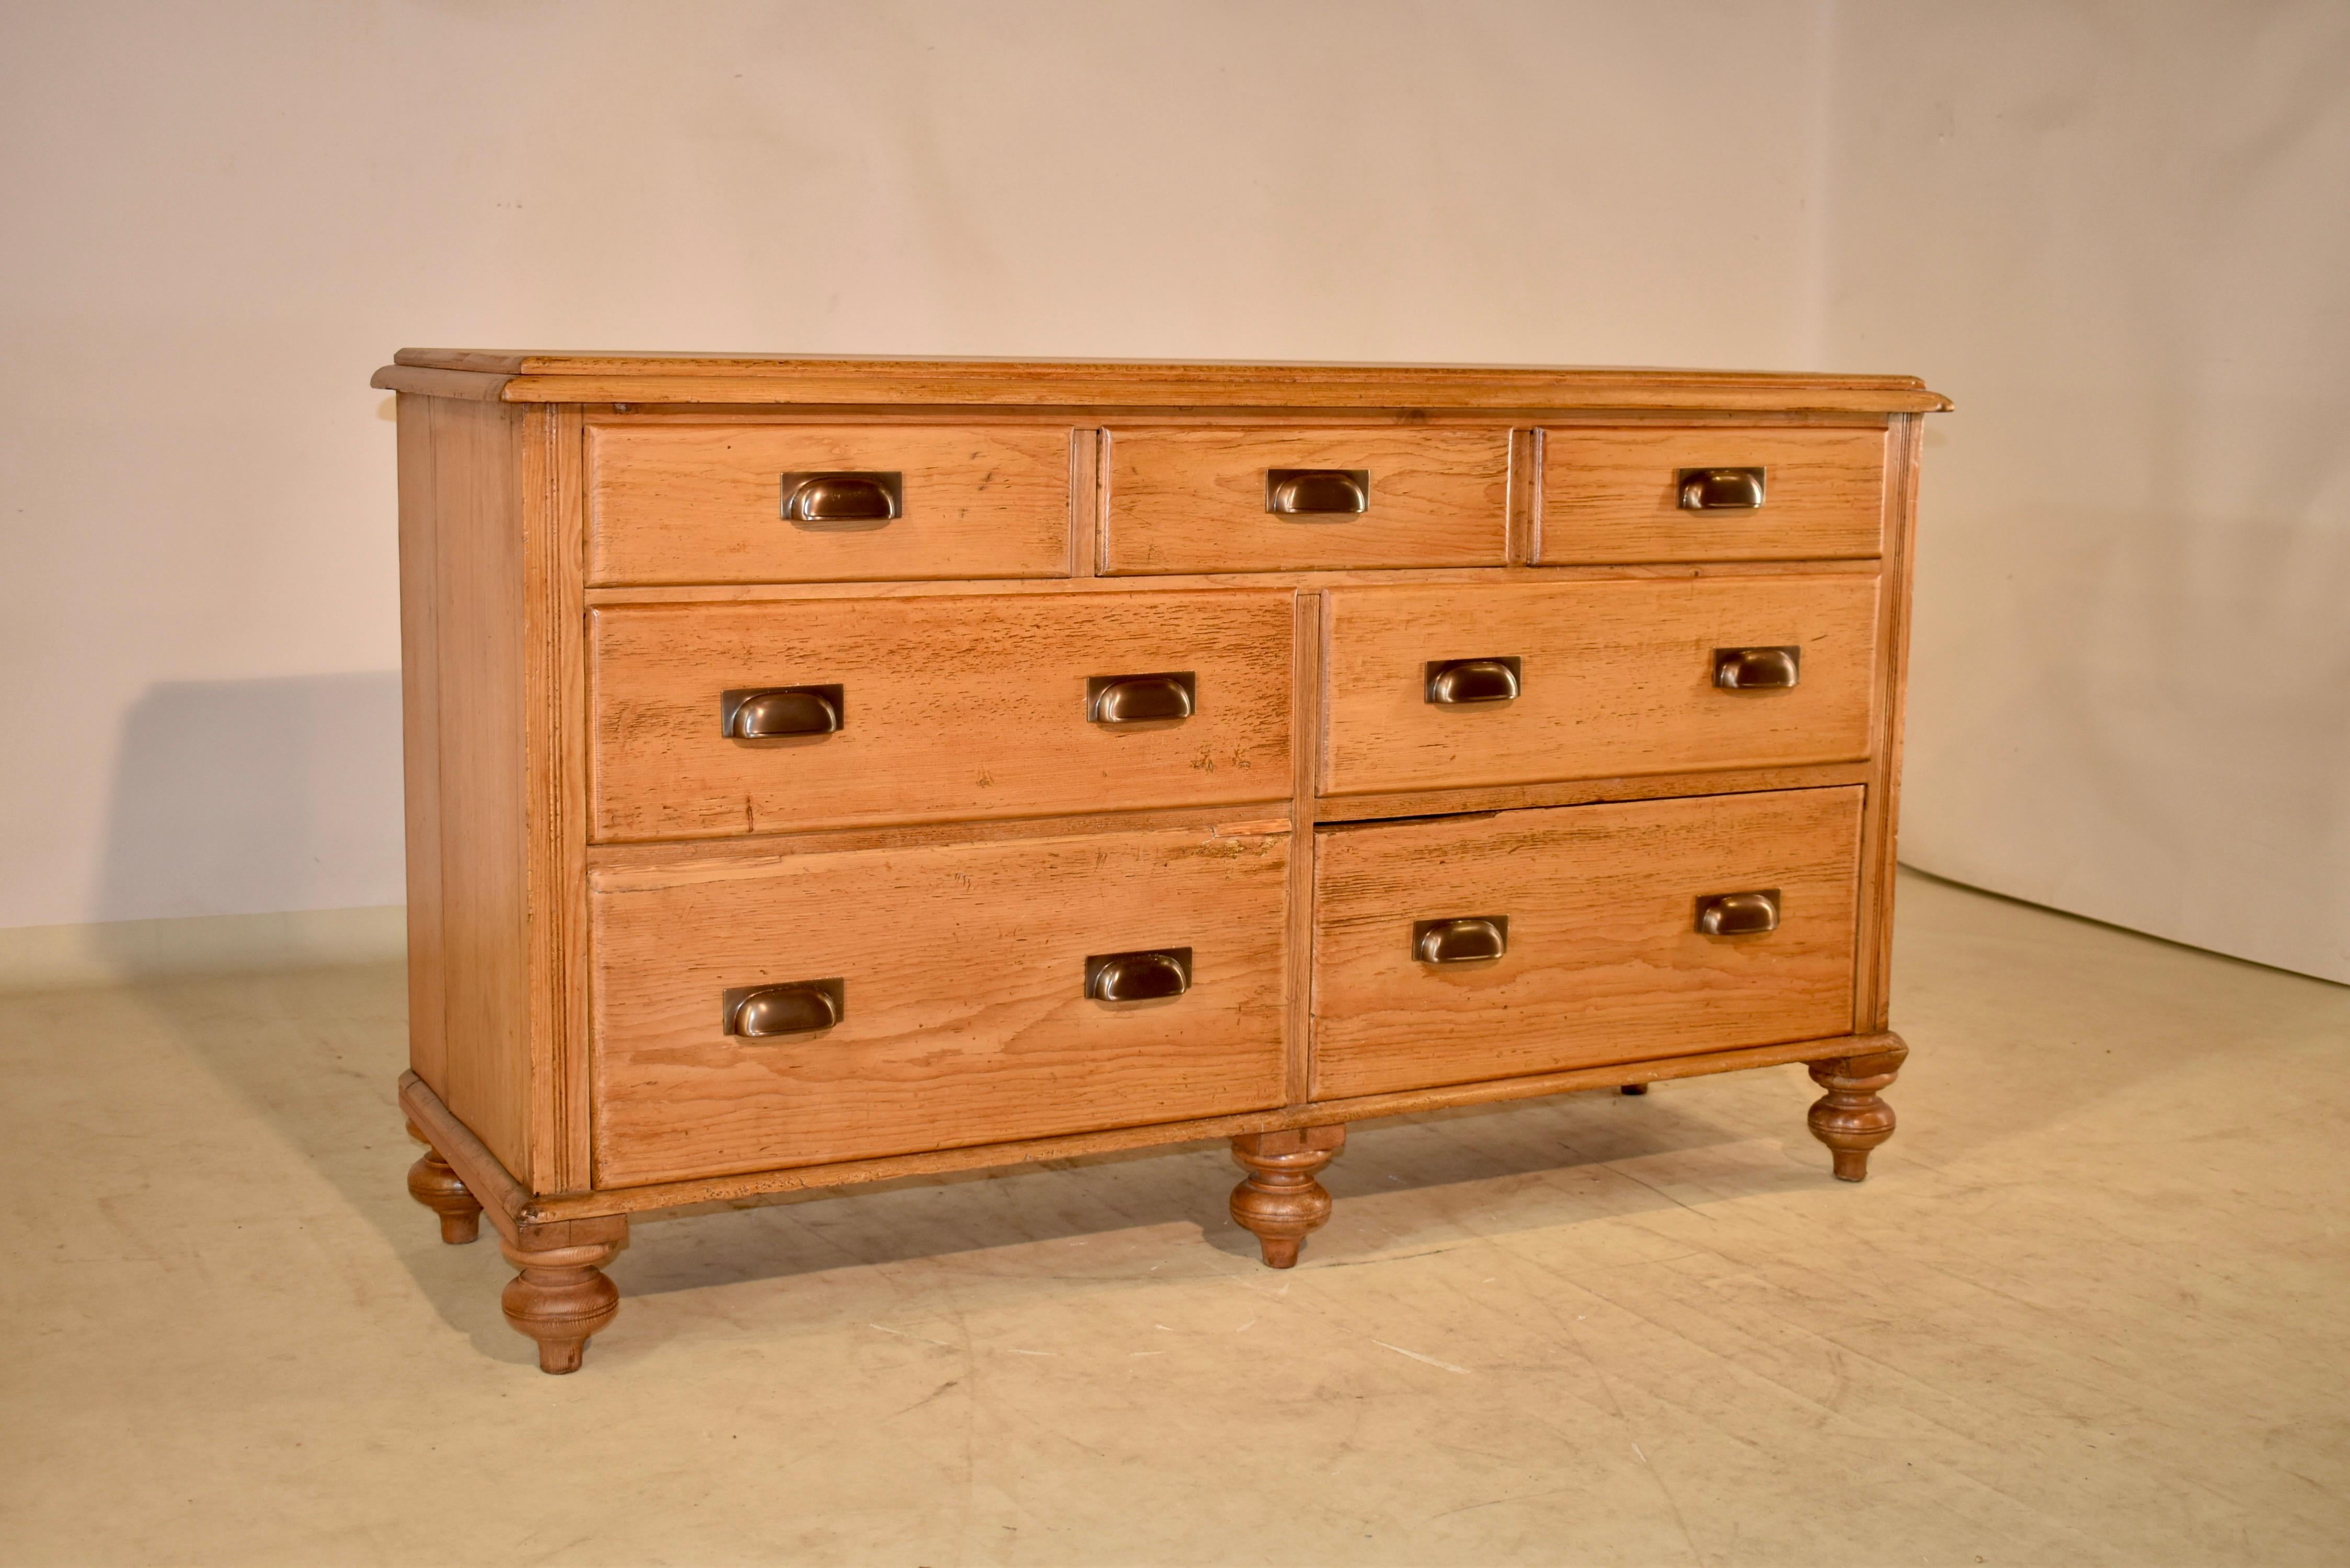 19th century pine wide chest of drawers from England with a beveled and molded edge around the top, following down to simple sides and three drawers over two sets of two drawers. The base has a molded edge as well, and the case is raised on hand